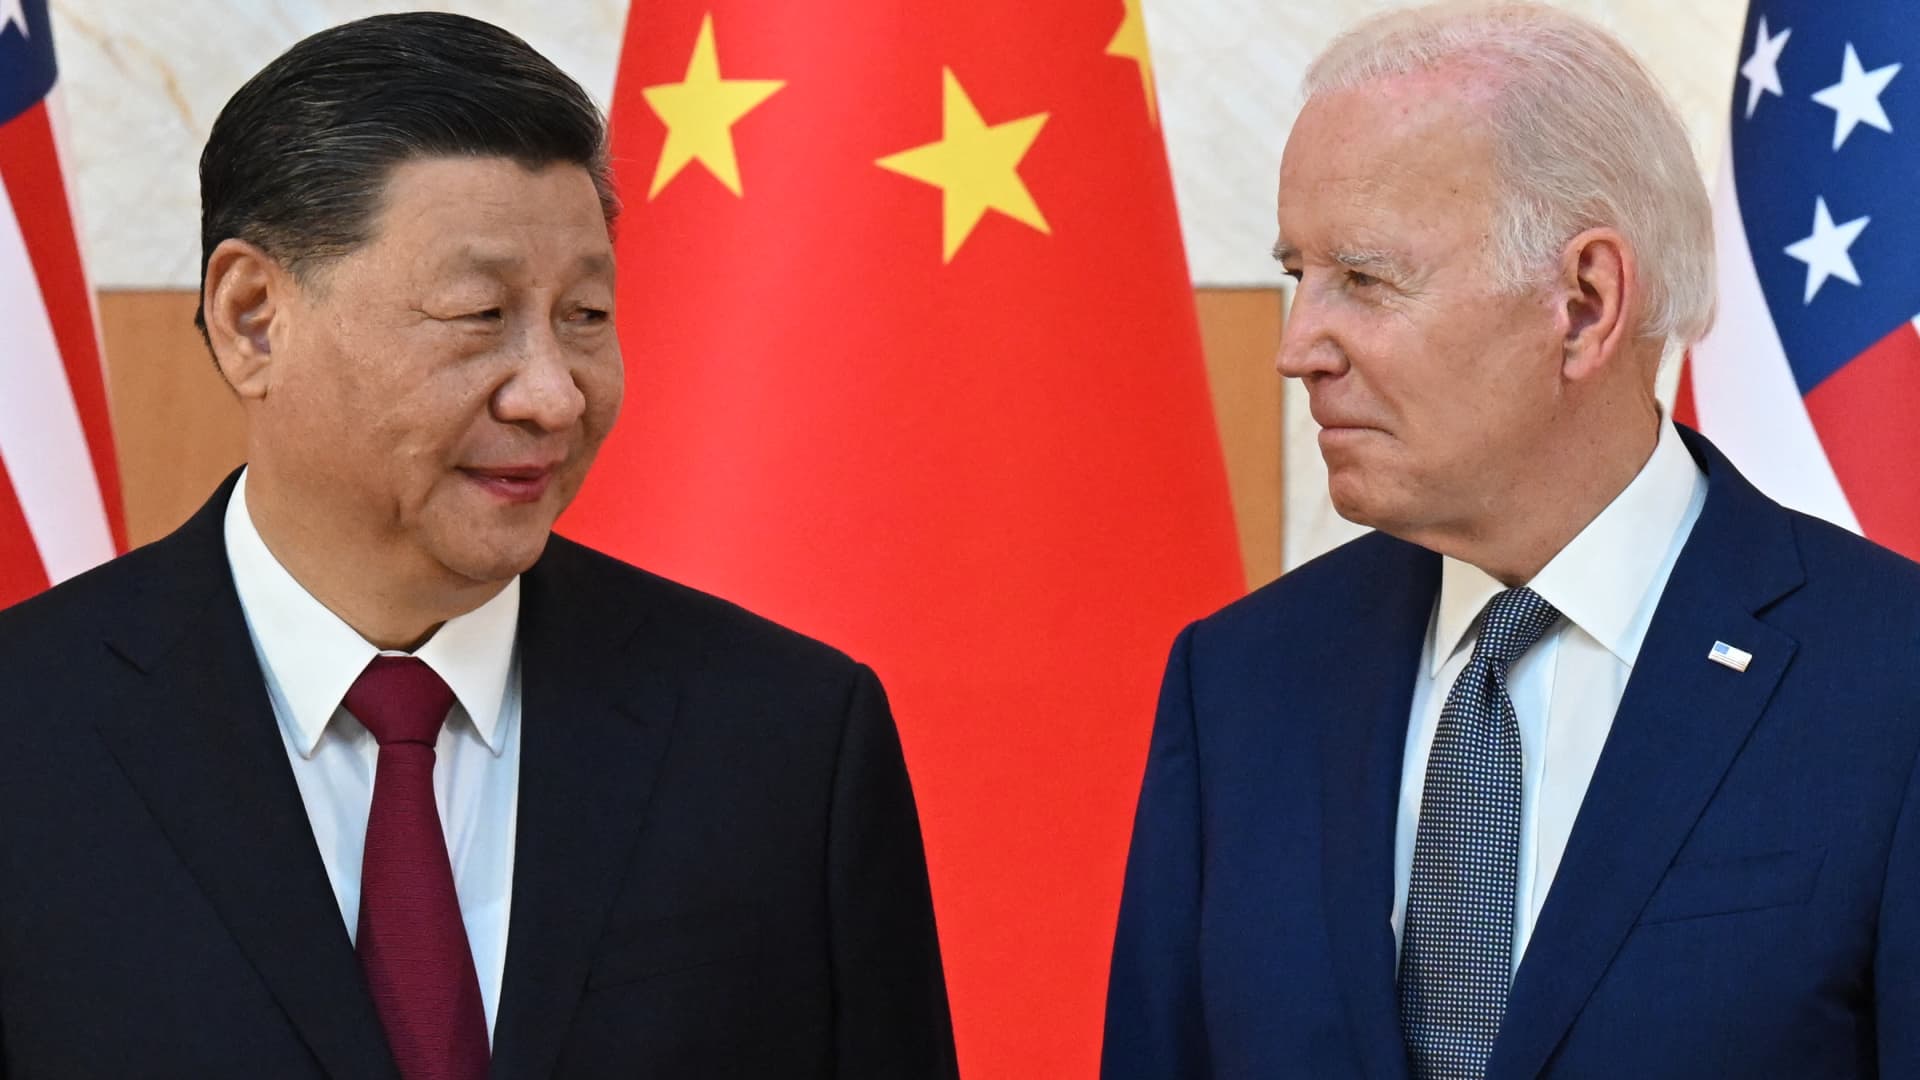 US-China ties on dangerous path with no trust on both sides: Roach, Cohen – NewsEverything Business